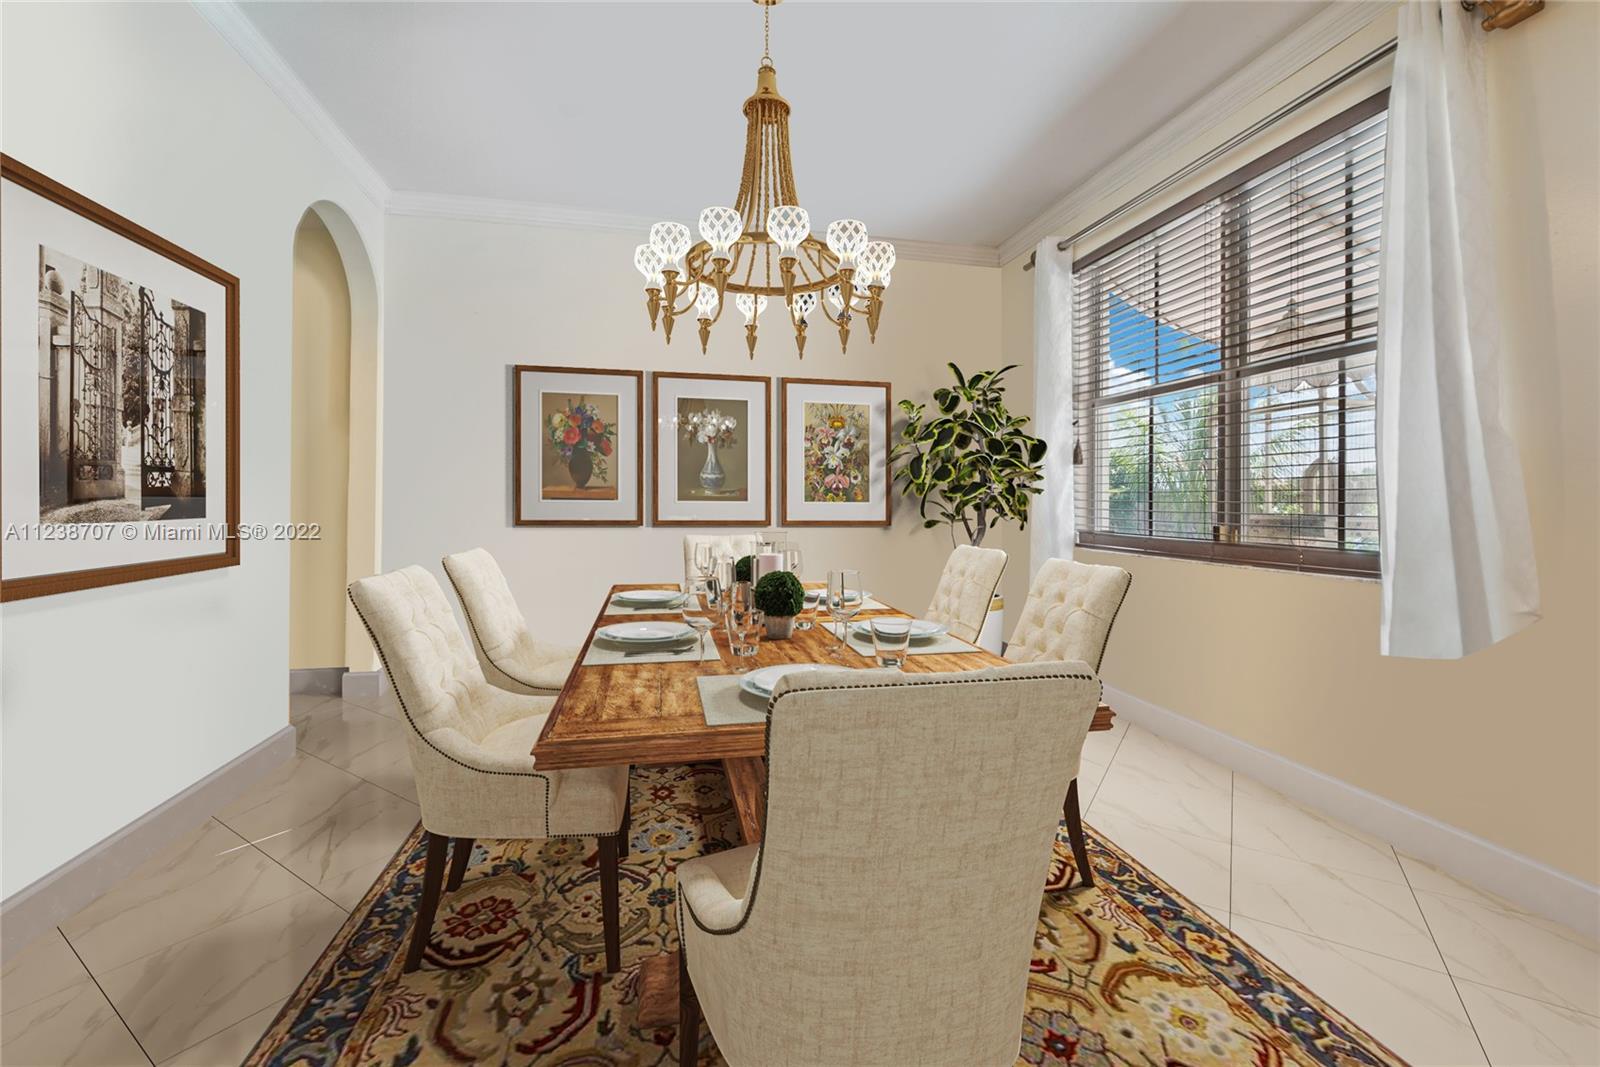 Formal dining room (can also be closed off for 2nd master bedroom on the first floor with bathroom and separate entry/ efficiency if desired) Staged image.